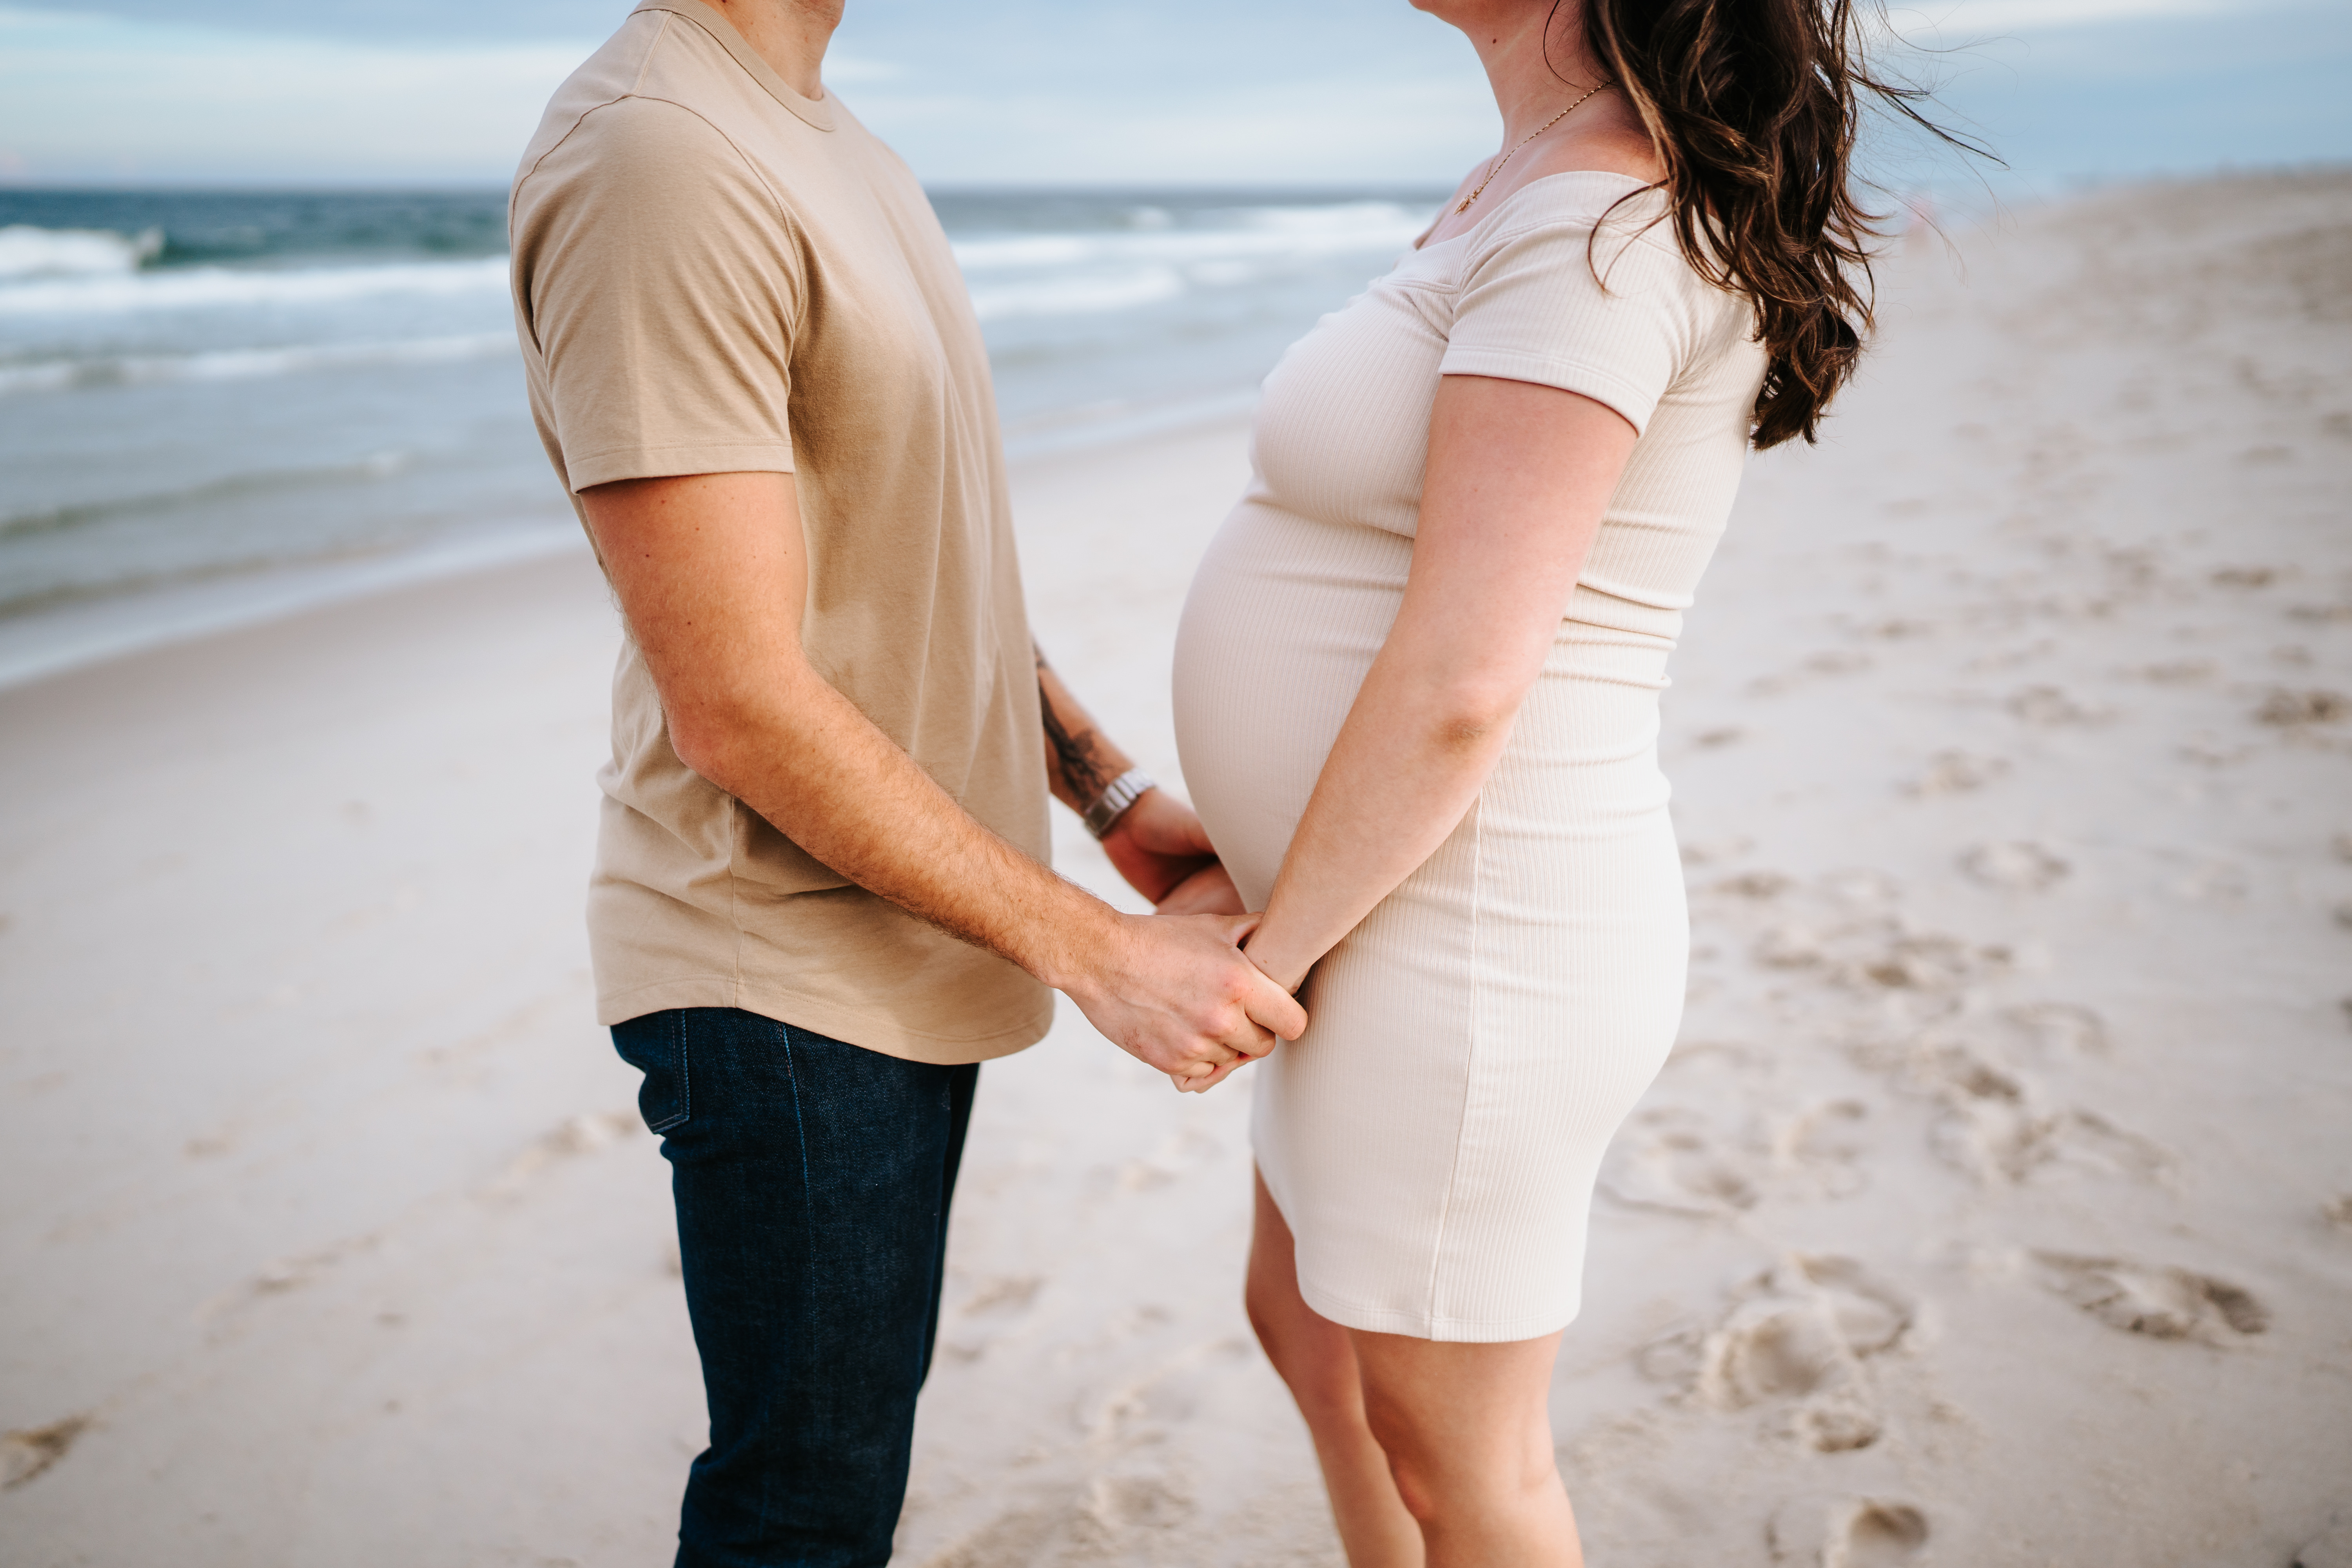 Summer Sunset Manor Beach Lavallette Maternity Session New Jersey Maternity Photographer